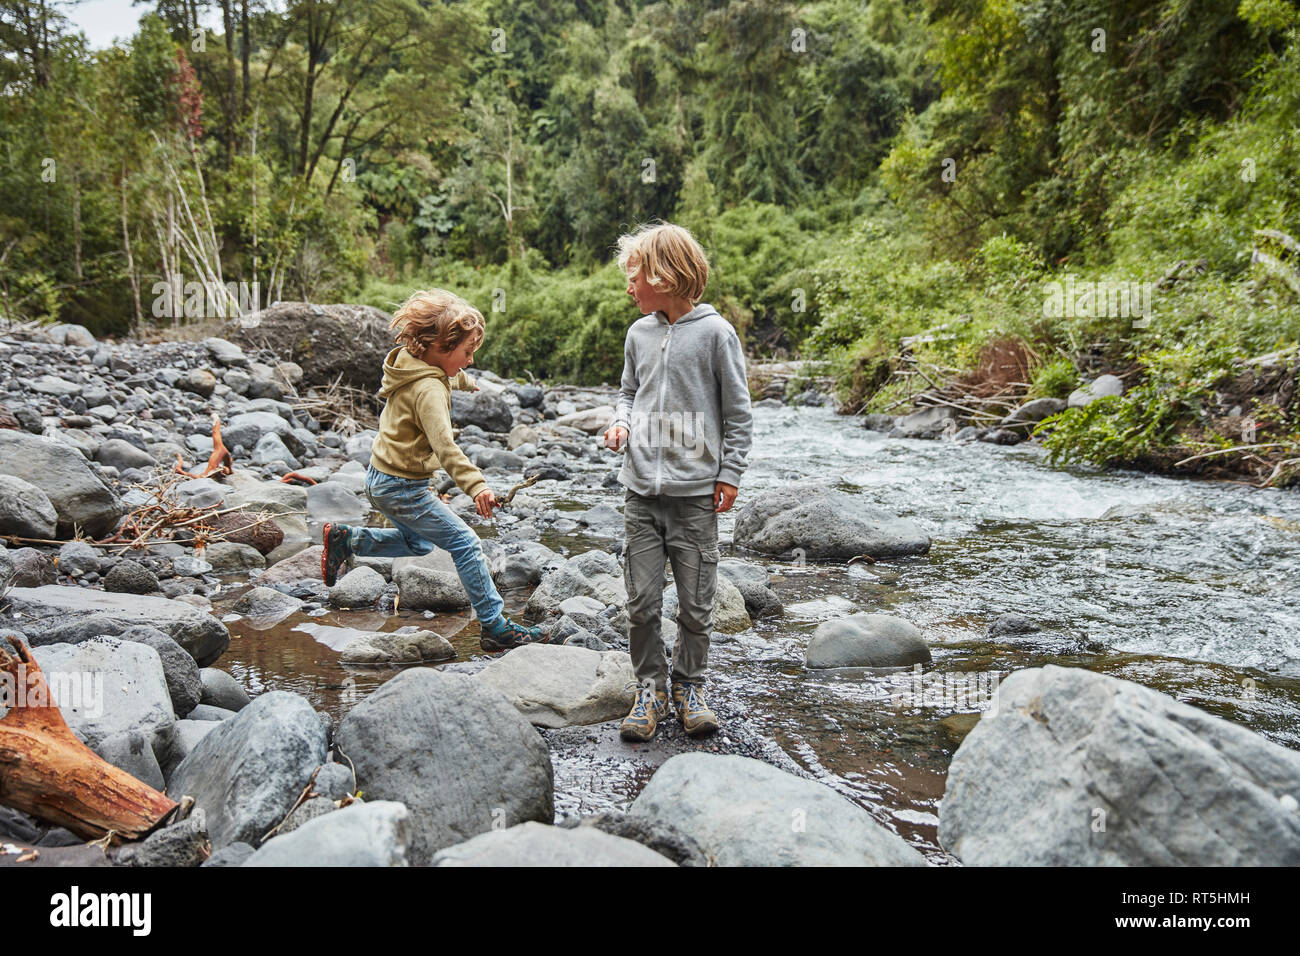 Chile, Patagonia, Osorno Volcano, Las Cascadas waterfall, two boys playing at a river Stock Photo